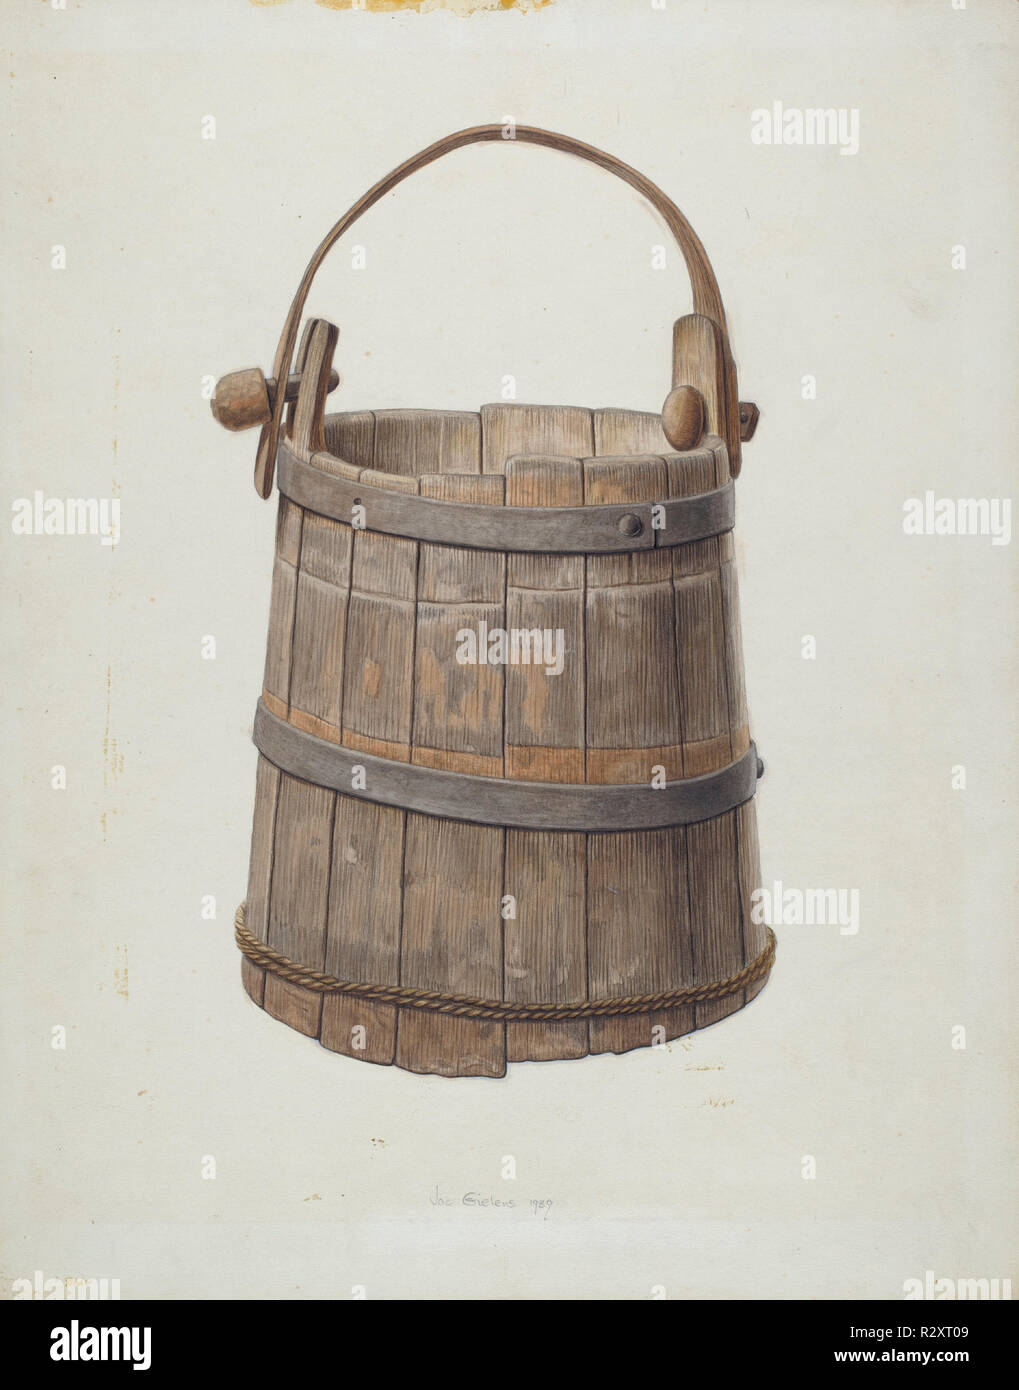 Milk Bucket. Dated: 1939. Dimensions: overall: 35.5 x 27.9 cm (14 x 11 in.)  Original IAD Object: 14 3/4' high; top: 7 1/2' in diameter; bottom: 8 1/2' in diameter. Medium: watercolor and graphite on paperboard. Museum: National Gallery of Art, Washington DC. Author: Jacob Gielens. Stock Photo